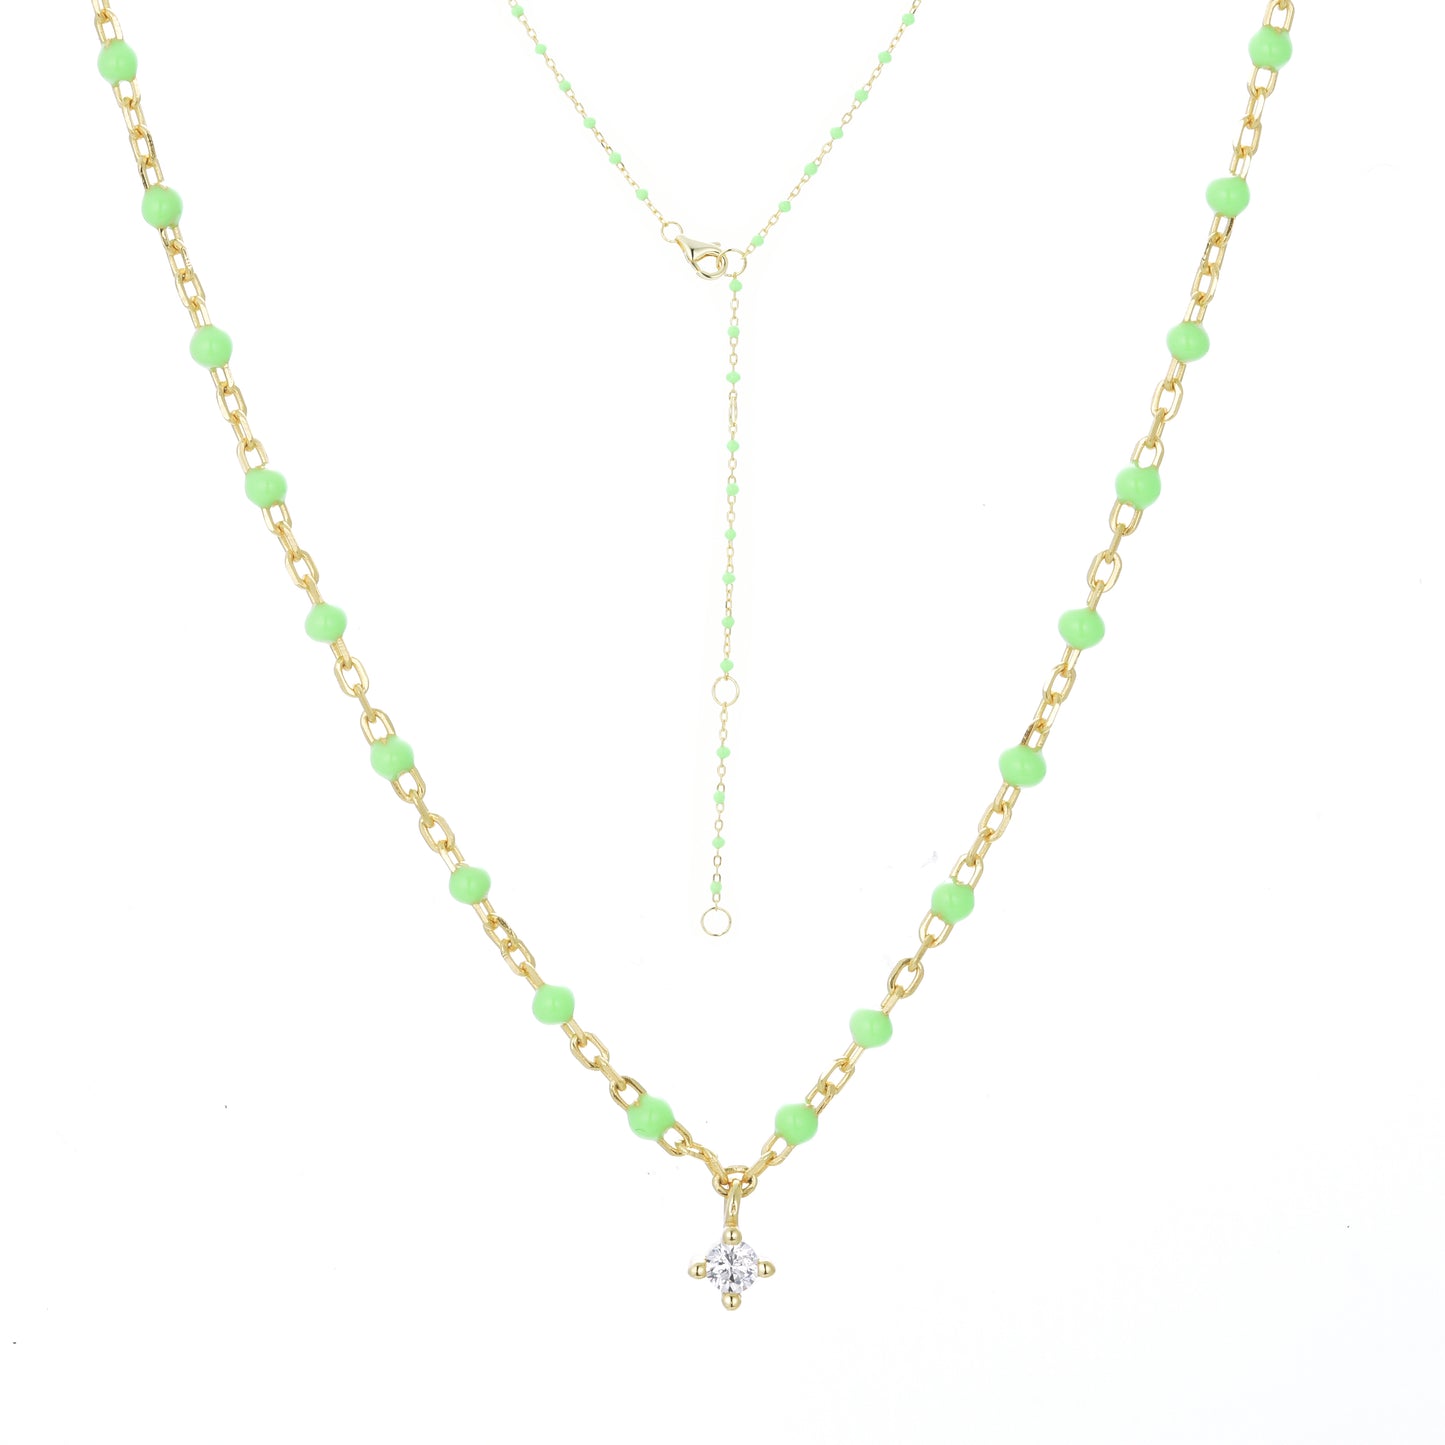 NG-10/G/AG - Chain and Bead Necklace with Hanging Cubic Zirconia (New Colour)